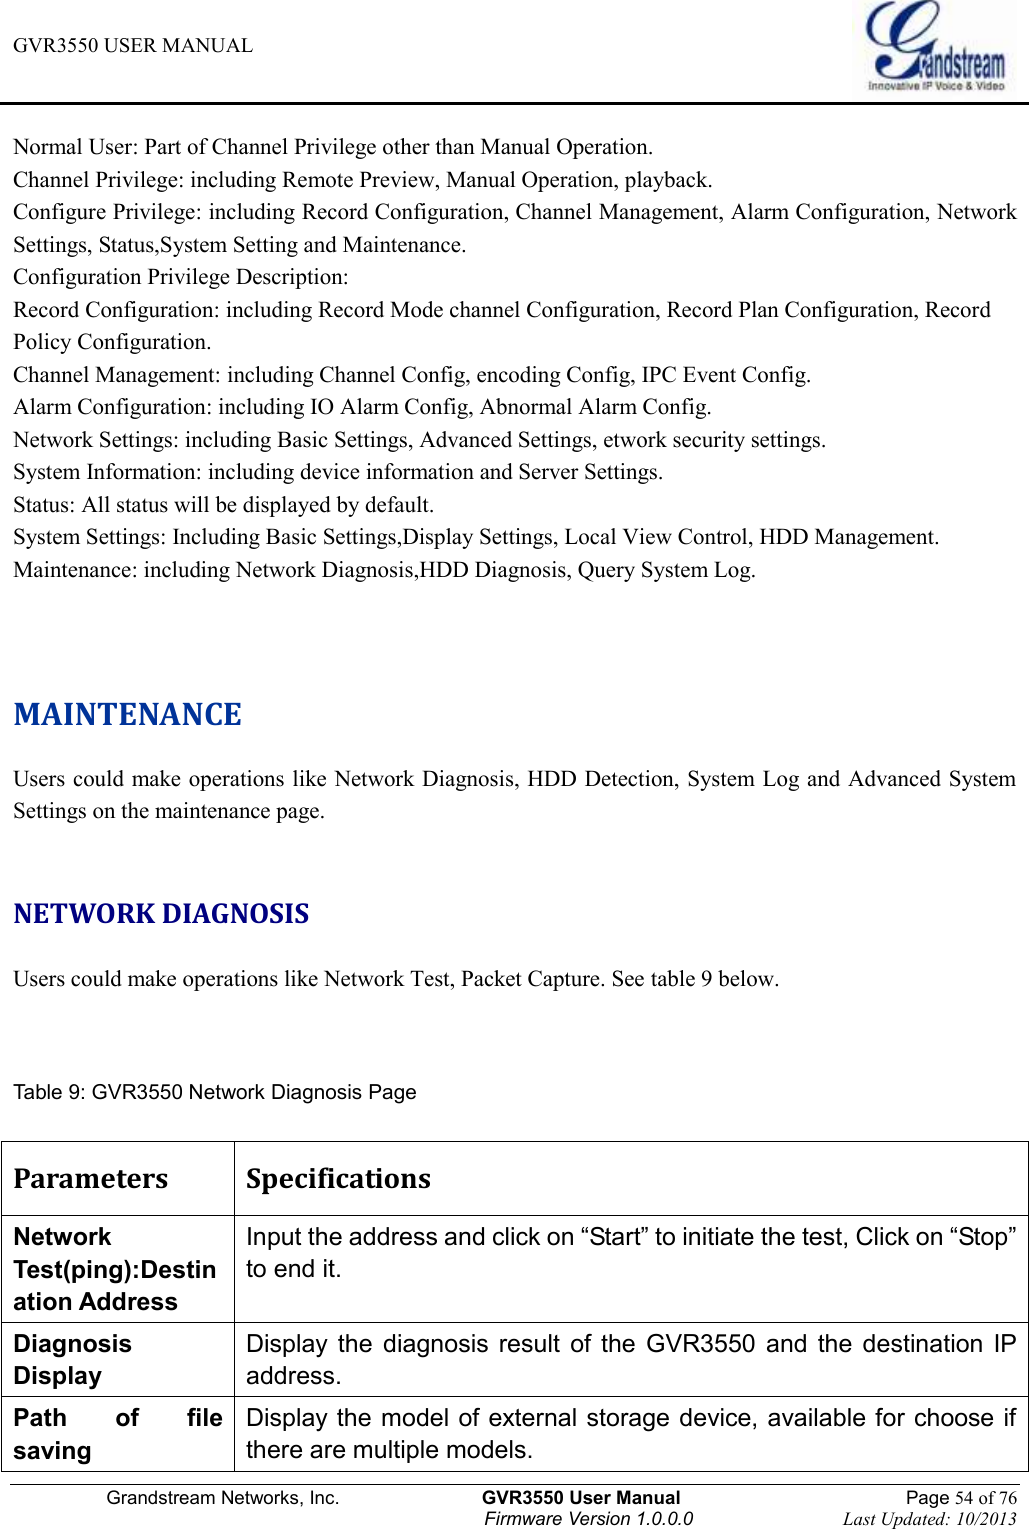 GVR3550 USER MANUAL   Grandstream Networks, Inc.                    GVR3550 User Manual                                                Page 54 of 76 Firmware Version 1.0.0.0                                Last Updated: 10/2013  Normal User: Part of Channel Privilege other than Manual Operation. Channel Privilege: including Remote Preview, Manual Operation, playback. Configure Privilege: including Record Configuration, Channel Management, Alarm Configuration, Network   Settings, Status,System Setting and Maintenance. Configuration Privilege Description: Record Configuration: including Record Mode channel Configuration, Record Plan Configuration, Record Policy Configuration. Channel Management: including Channel Config, encoding Config, IPC Event Config. Alarm Configuration: including IO Alarm Config, Abnormal Alarm Config. Network Settings: including Basic Settings, Advanced Settings, etwork security settings. System Information: including device information and Server Settings. Status: All status will be displayed by default. System Settings: Including Basic Settings,Display Settings, Local View Control, HDD Management. Maintenance: including Network Diagnosis,HDD Diagnosis, Query System Log.   MAINTENANCE Users could make operations like Network Diagnosis, HDD Detection, System Log and Advanced System Settings on the maintenance page.  NETWORK DIAGNOSIS Users could make operations like Network Test, Packet Capture. See table 9 below.   Table 9: GVR3550 Network Diagnosis Page  Parameters Specifications Network Test(ping):Destination Address Input the address and click on “Start” to initiate the test, Click on “Stop” to end it. Diagnosis Display Display  the  diagnosis result  of  the  GVR3550  and  the destination IP address. Path  of  file saving Display the model of external storage device, available for choose if there are multiple models. 